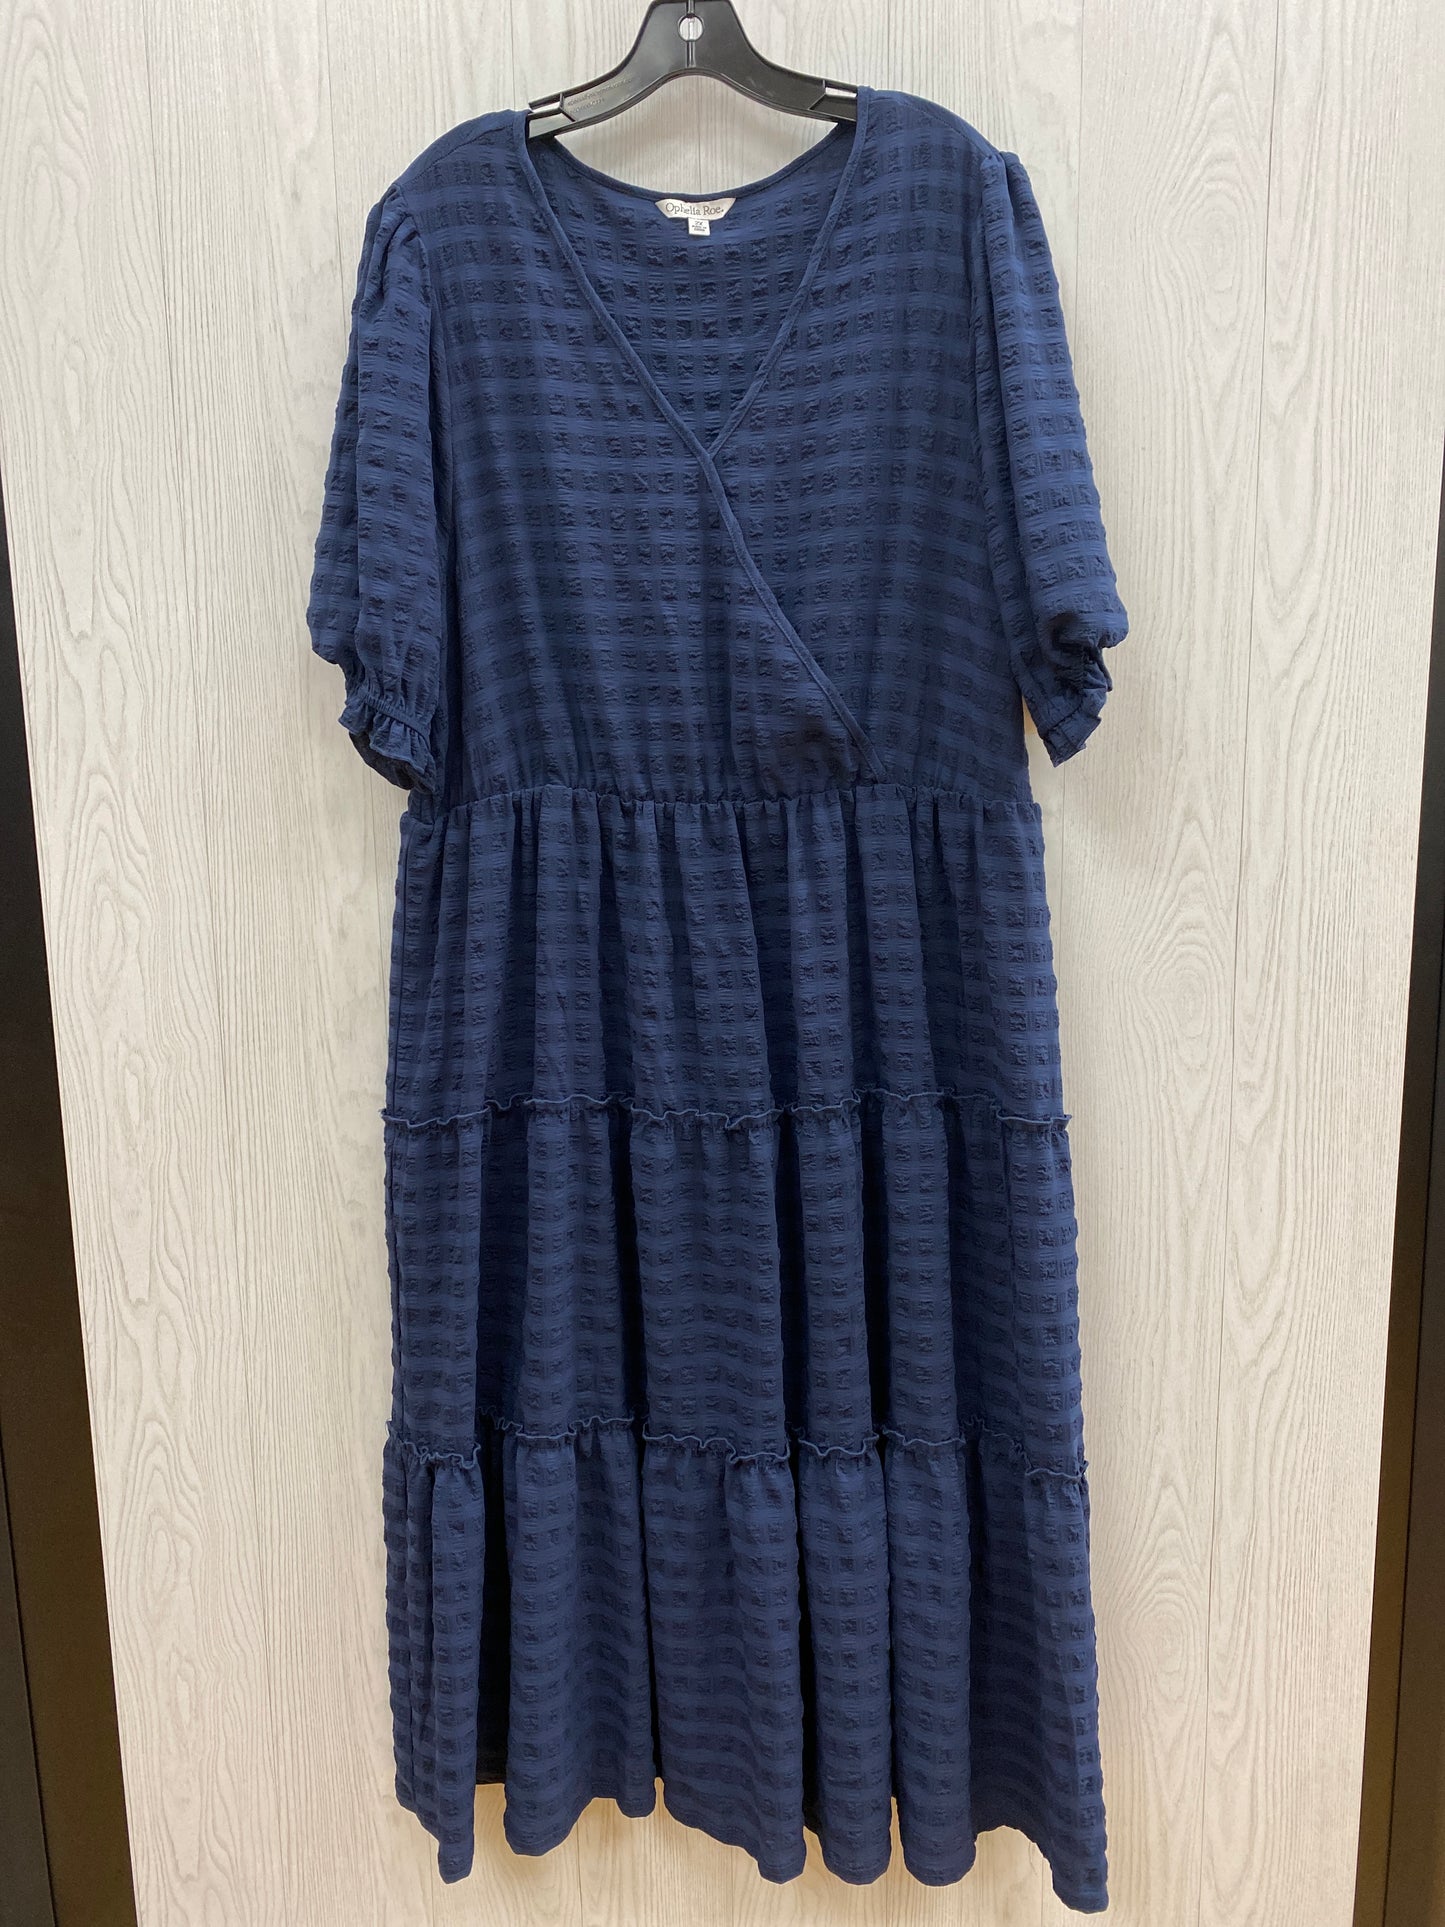 Dress Casual Maxi By Ophelia Roe  Size: 2x